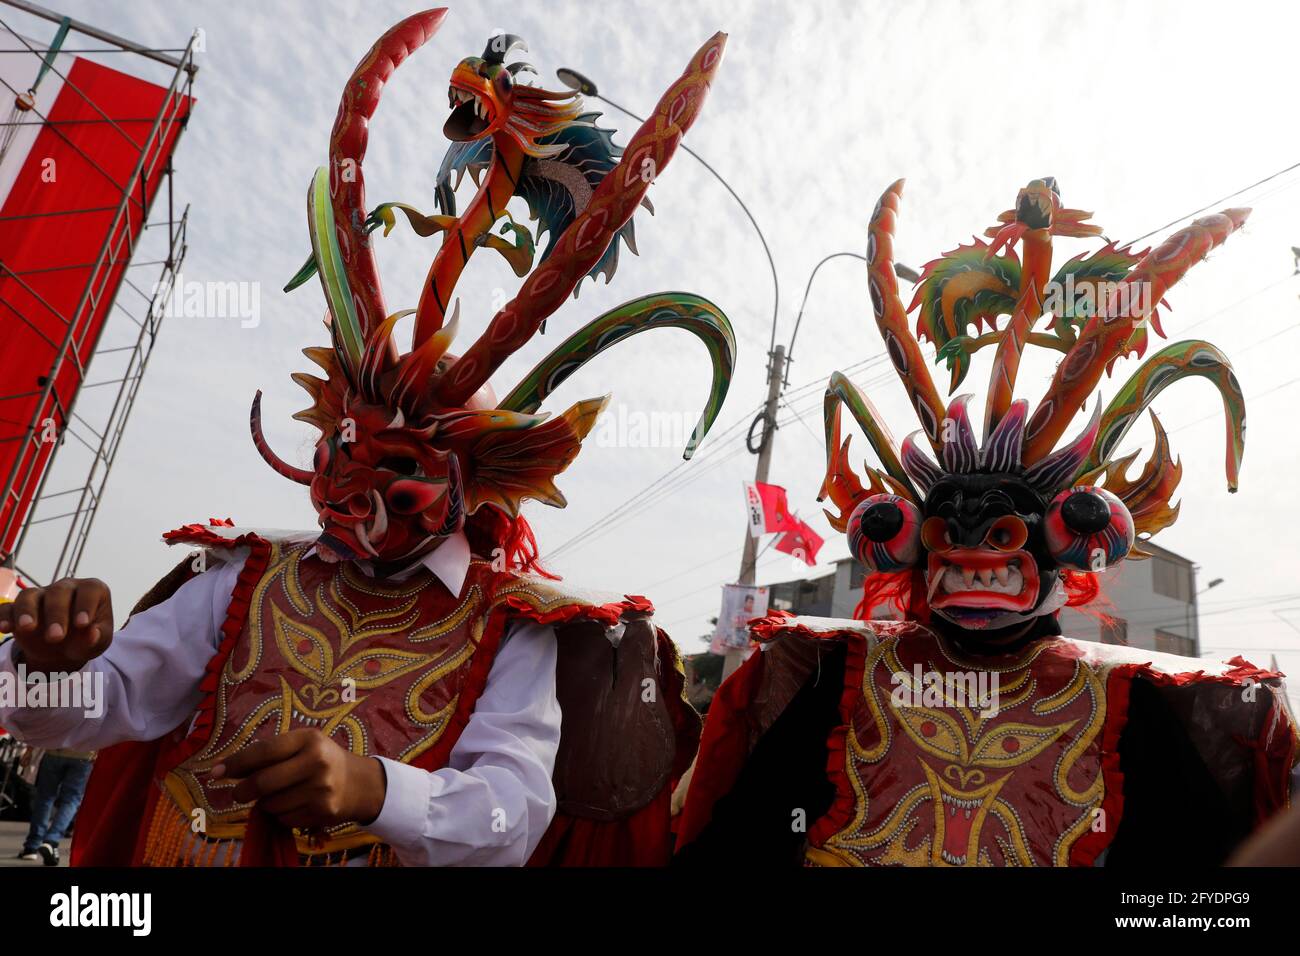 Lima, Peru. 26th May, 2021. Dancers with traditional dress attend a campaign rally for Presidential candidate Pedro Castillo, in Villa El Salvador neighborhood. On June 6 Peruvians will go to the polls to elect new President between Castillo and Keiko Fujimori. Credit: Mariana Bazo/ZUMA Wire/Alamy Live News Stock Photo